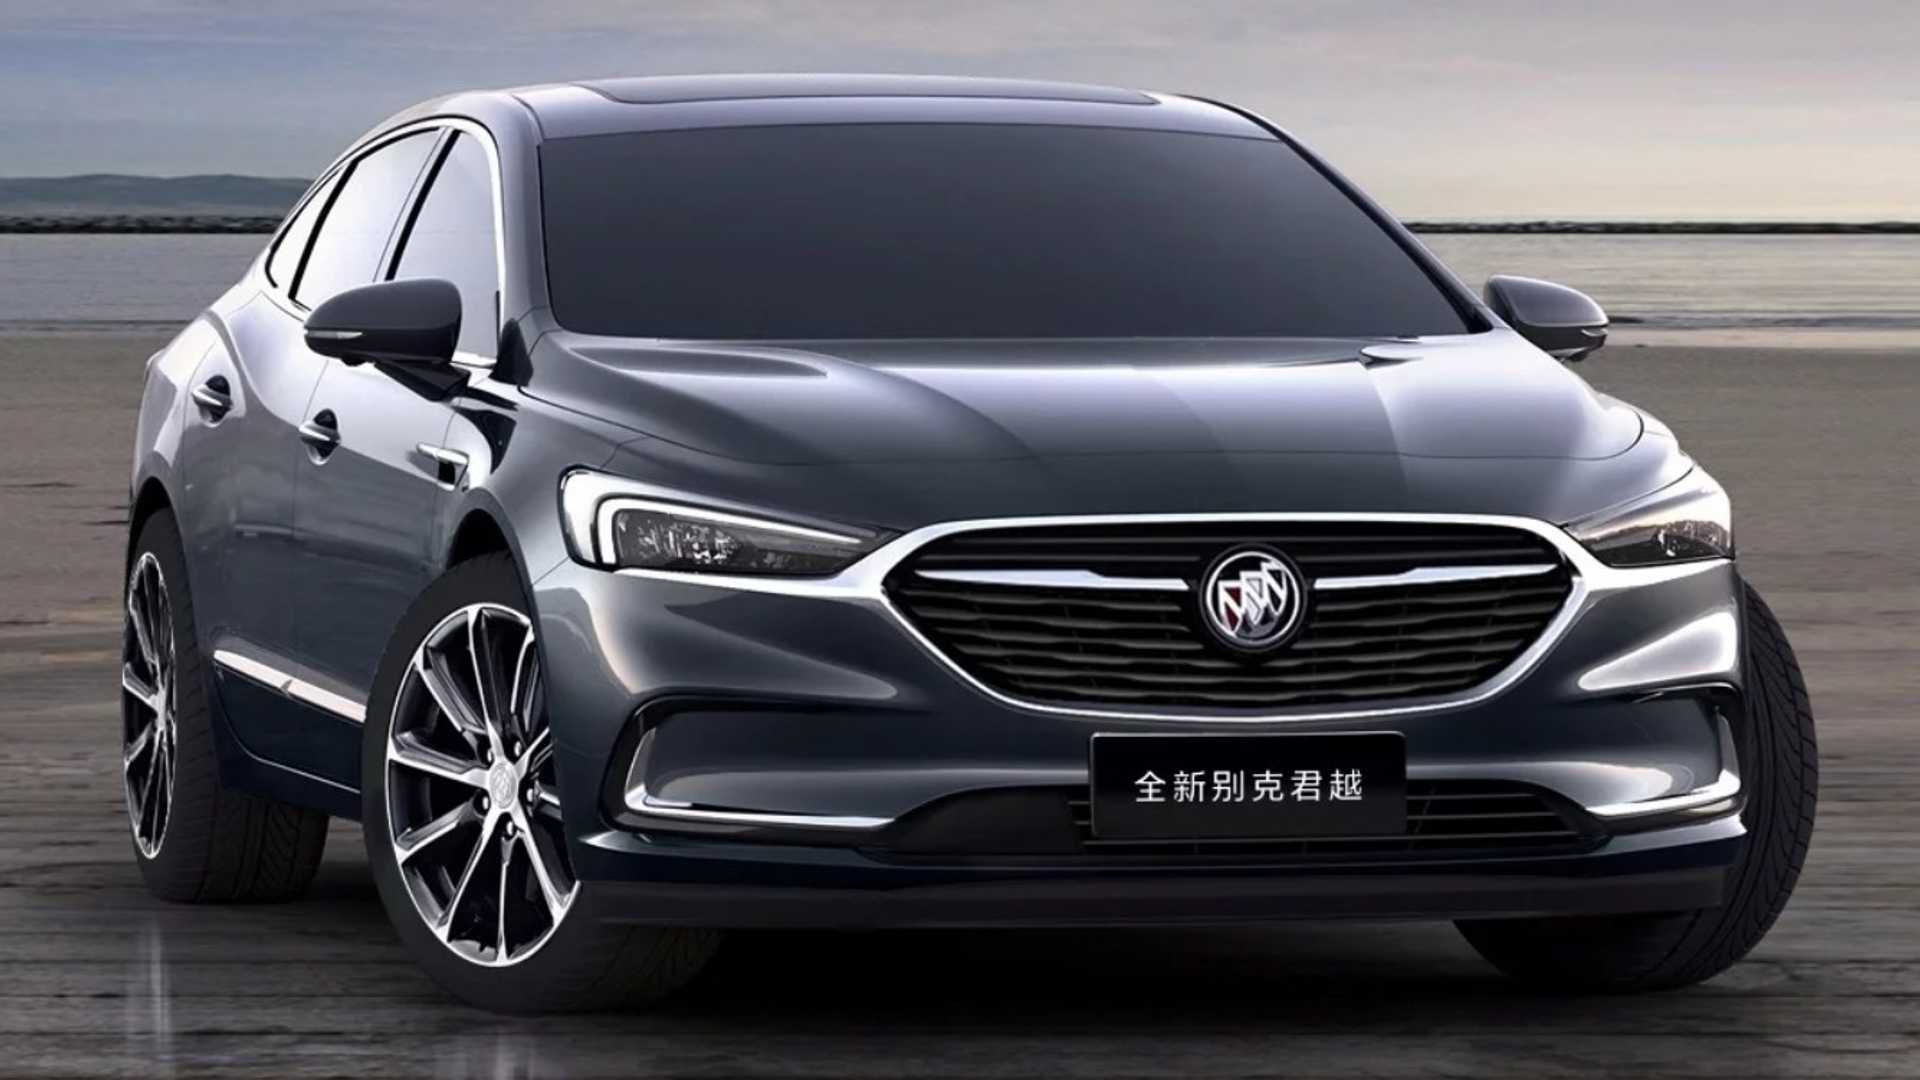 2020 Buick LaCrosse Debuts in China, Looks Like a Premium ...